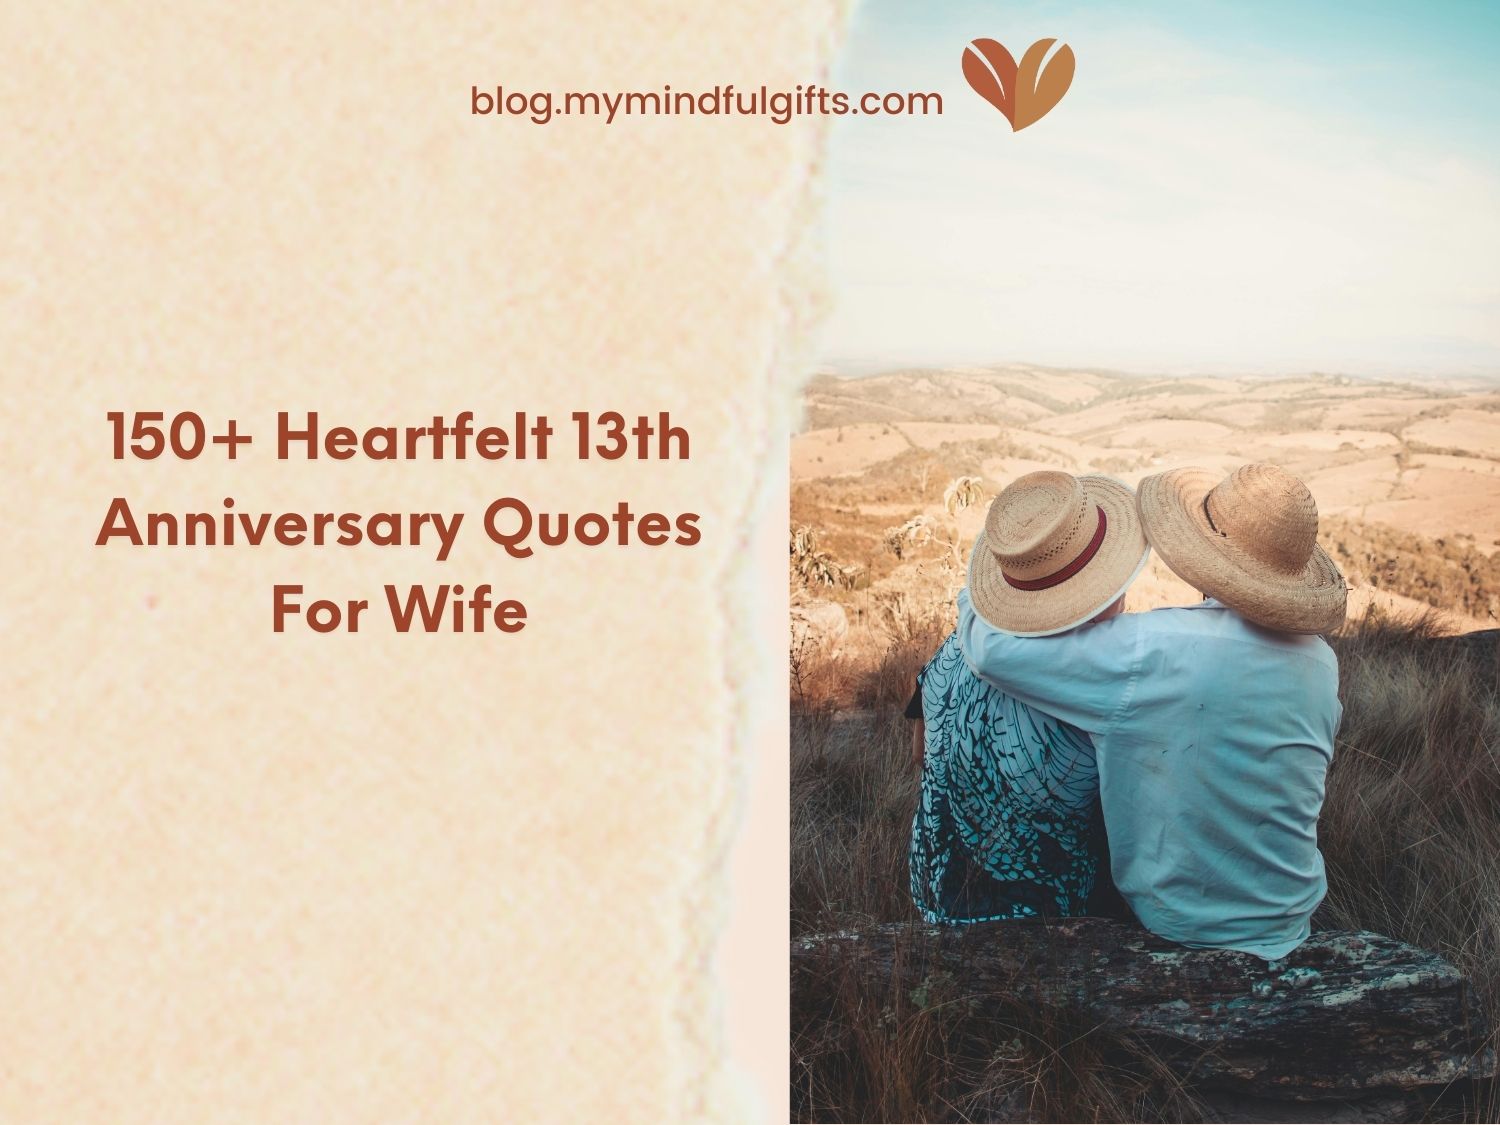 150+ Heartfelt 13th Anniversary Quotes For Wife